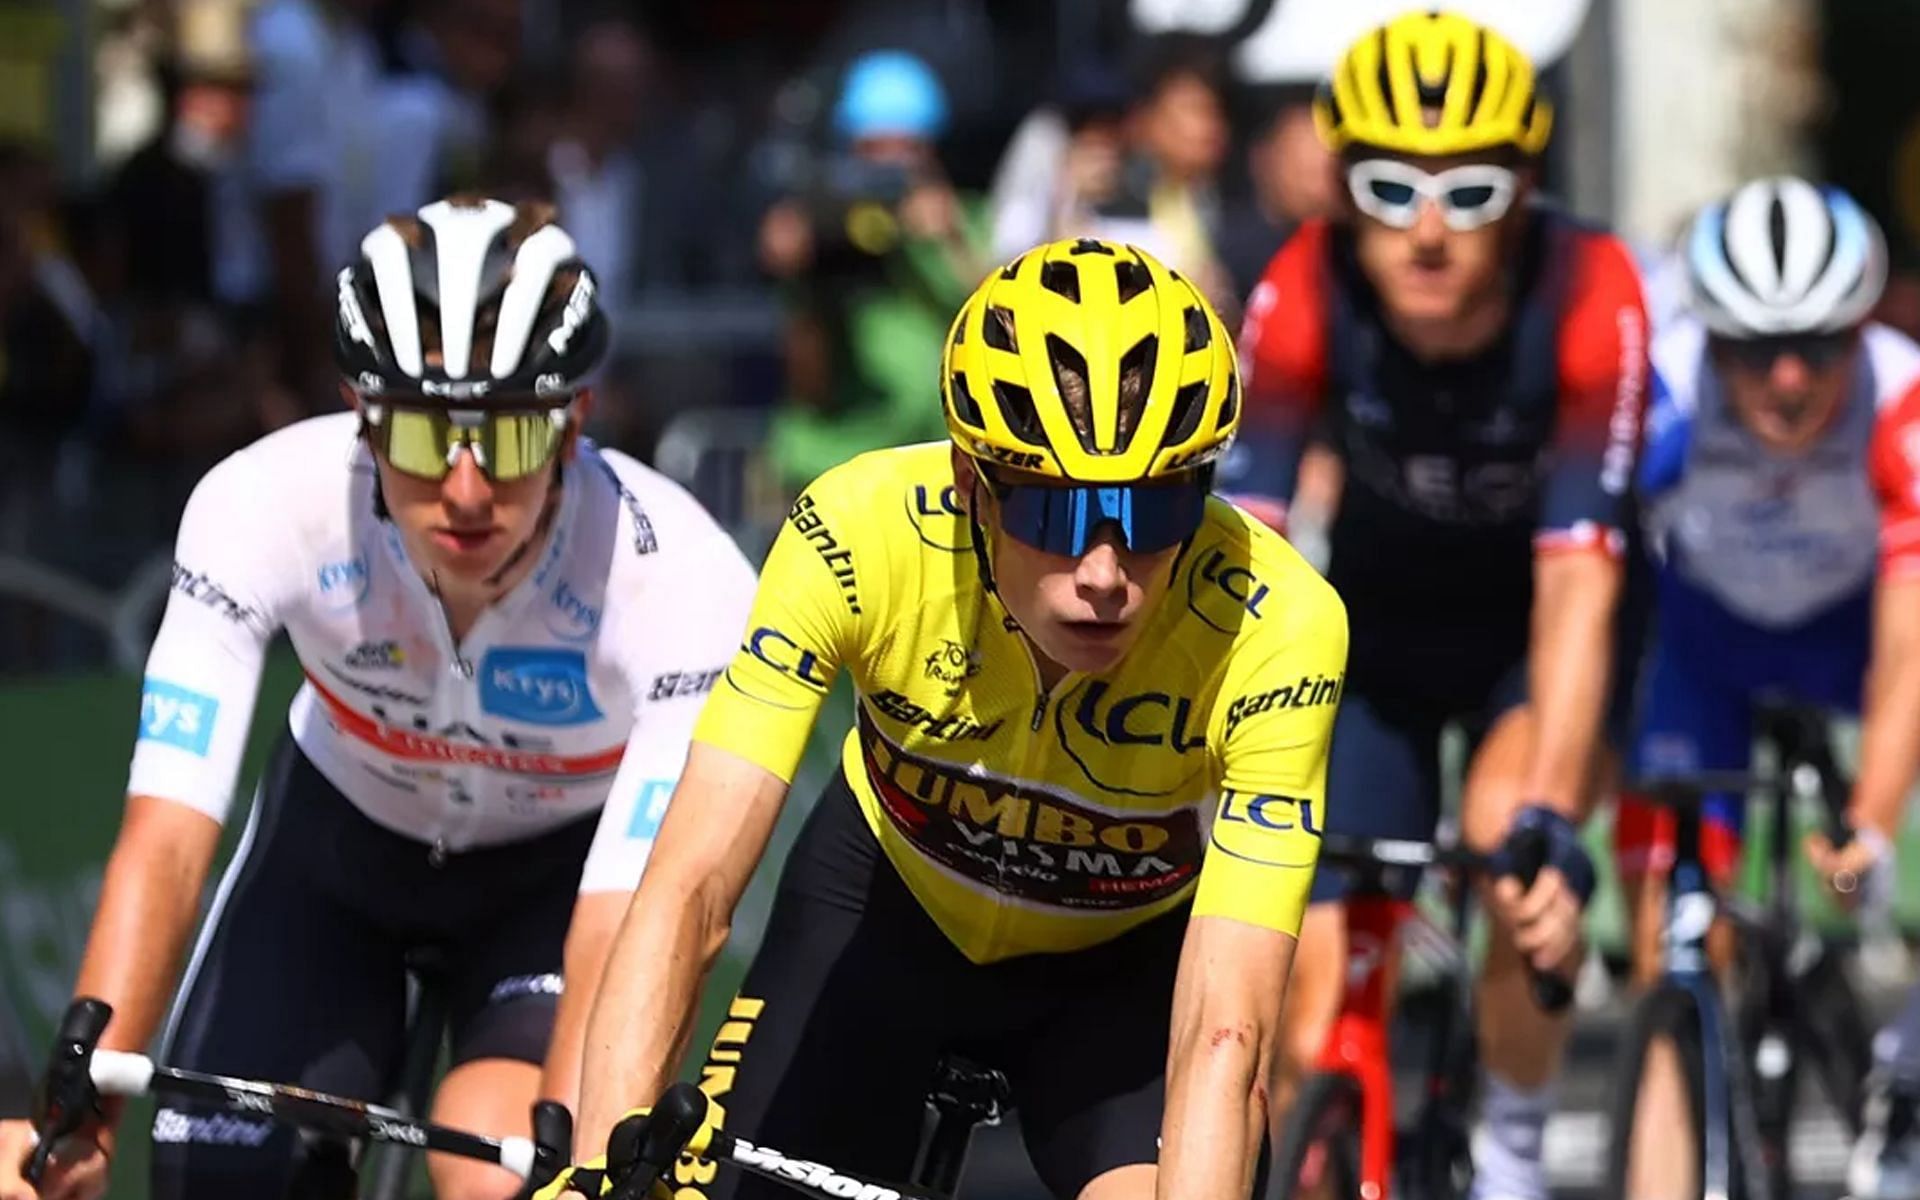 Tour de France 2022 has already commenced on July 1. (Image via Getty Images)